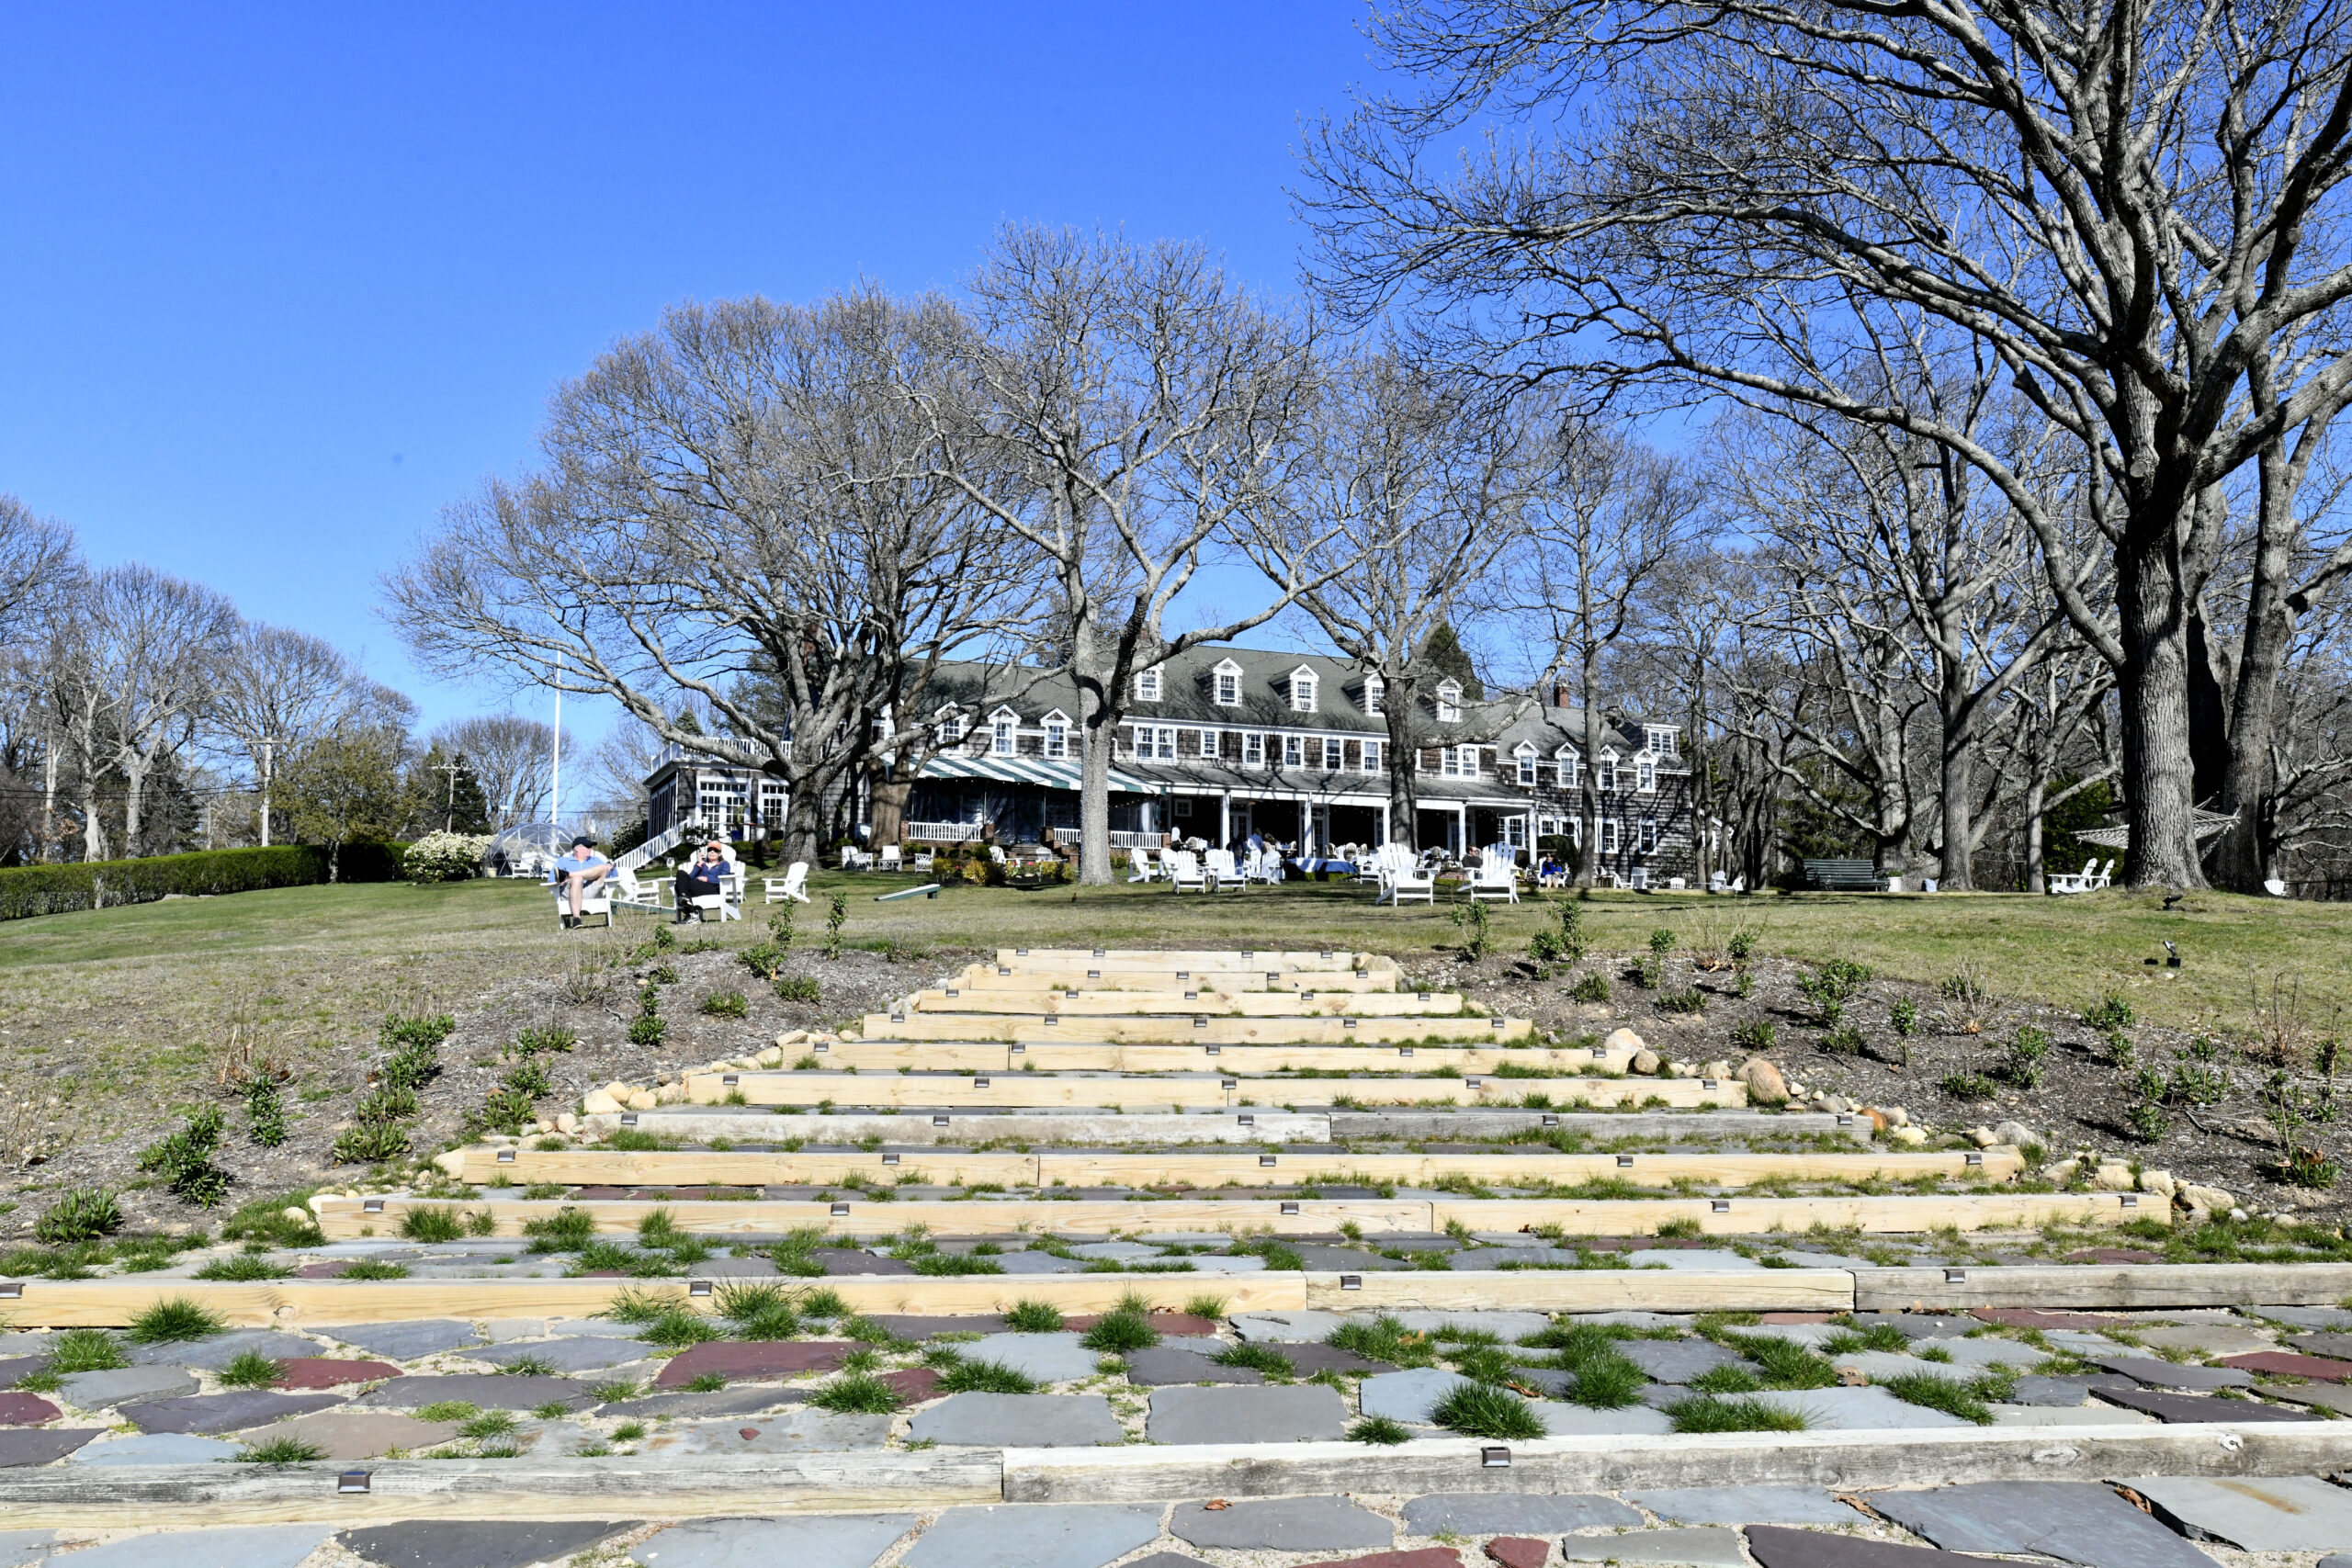 The Grand Hotels Of Shelter Island